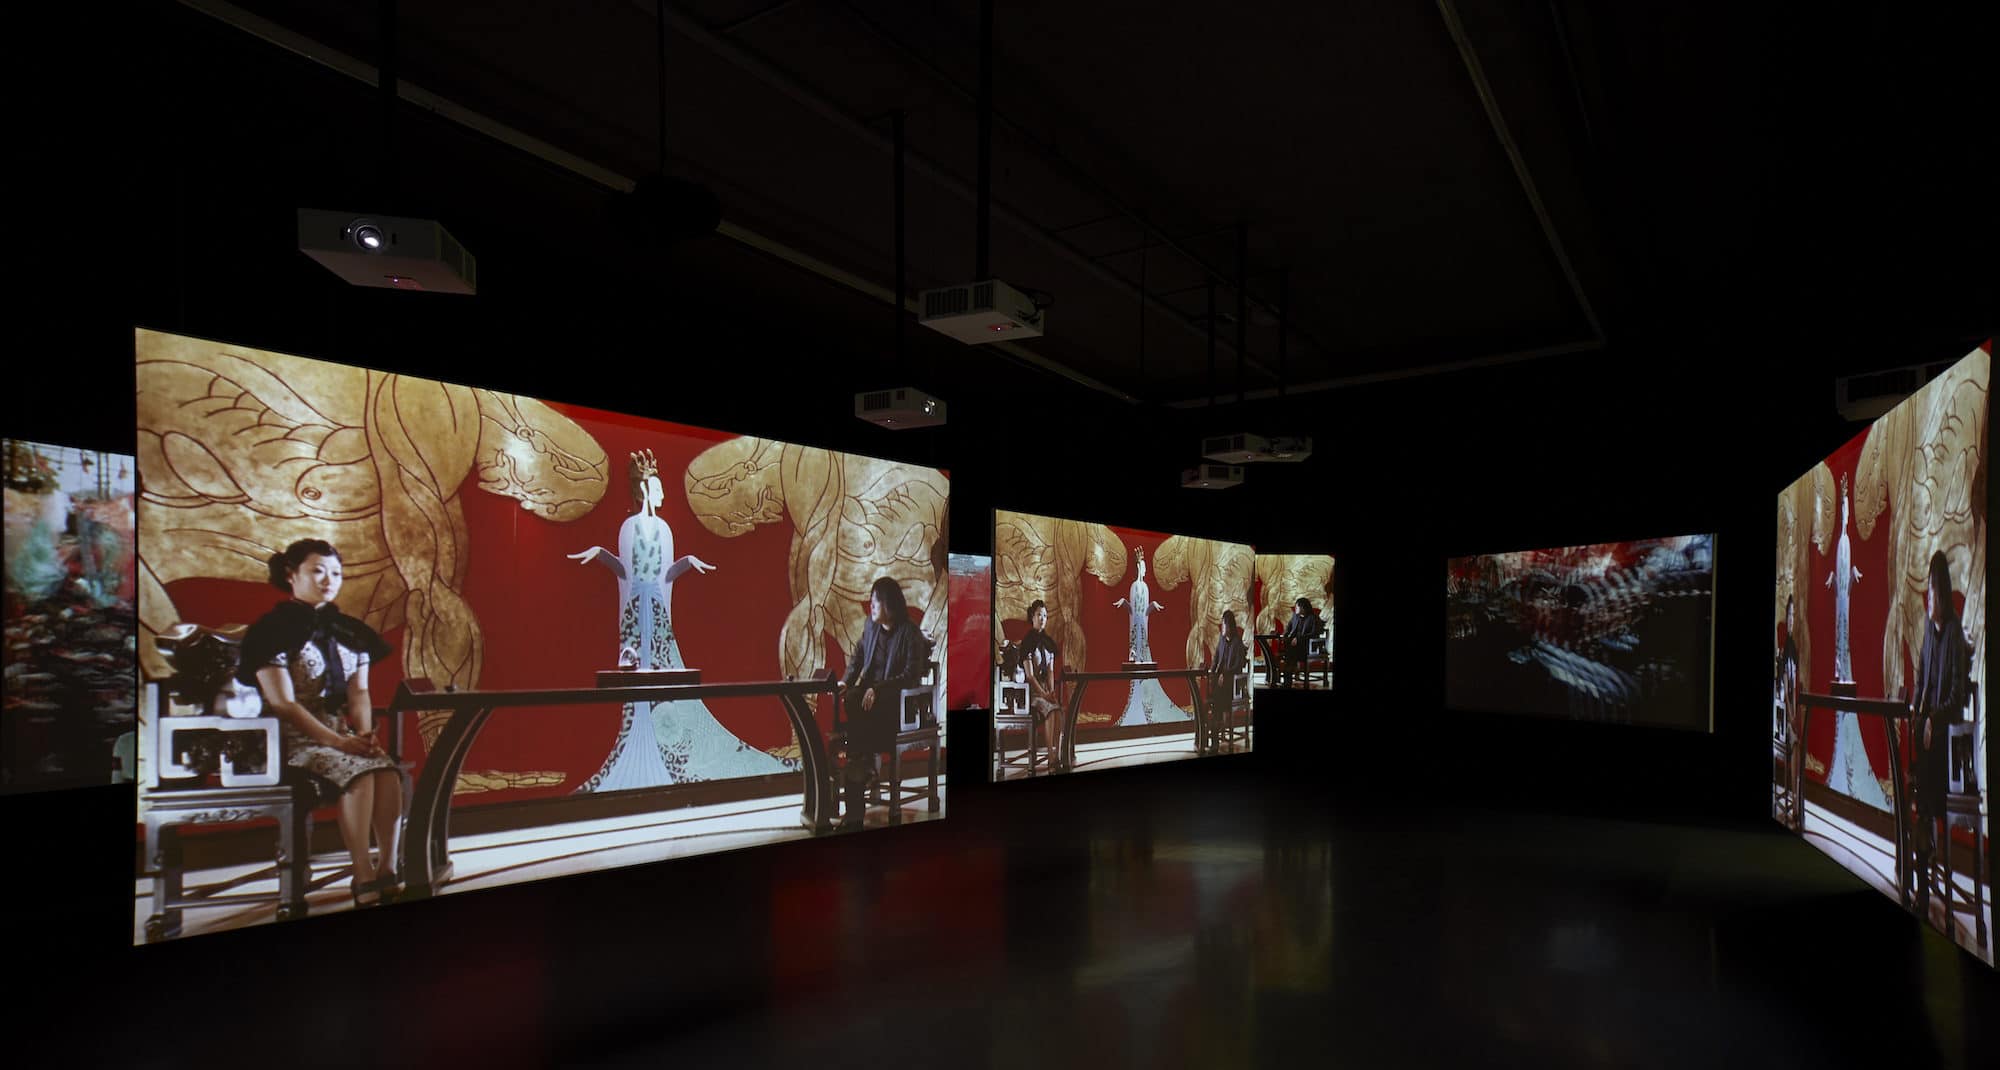 2238Isaac Julien. Ten Thousand Waves. 2009. Digital video (colour, sound). 55 minutes. On long-term loan from the Zeitz Collection. (Installation view)